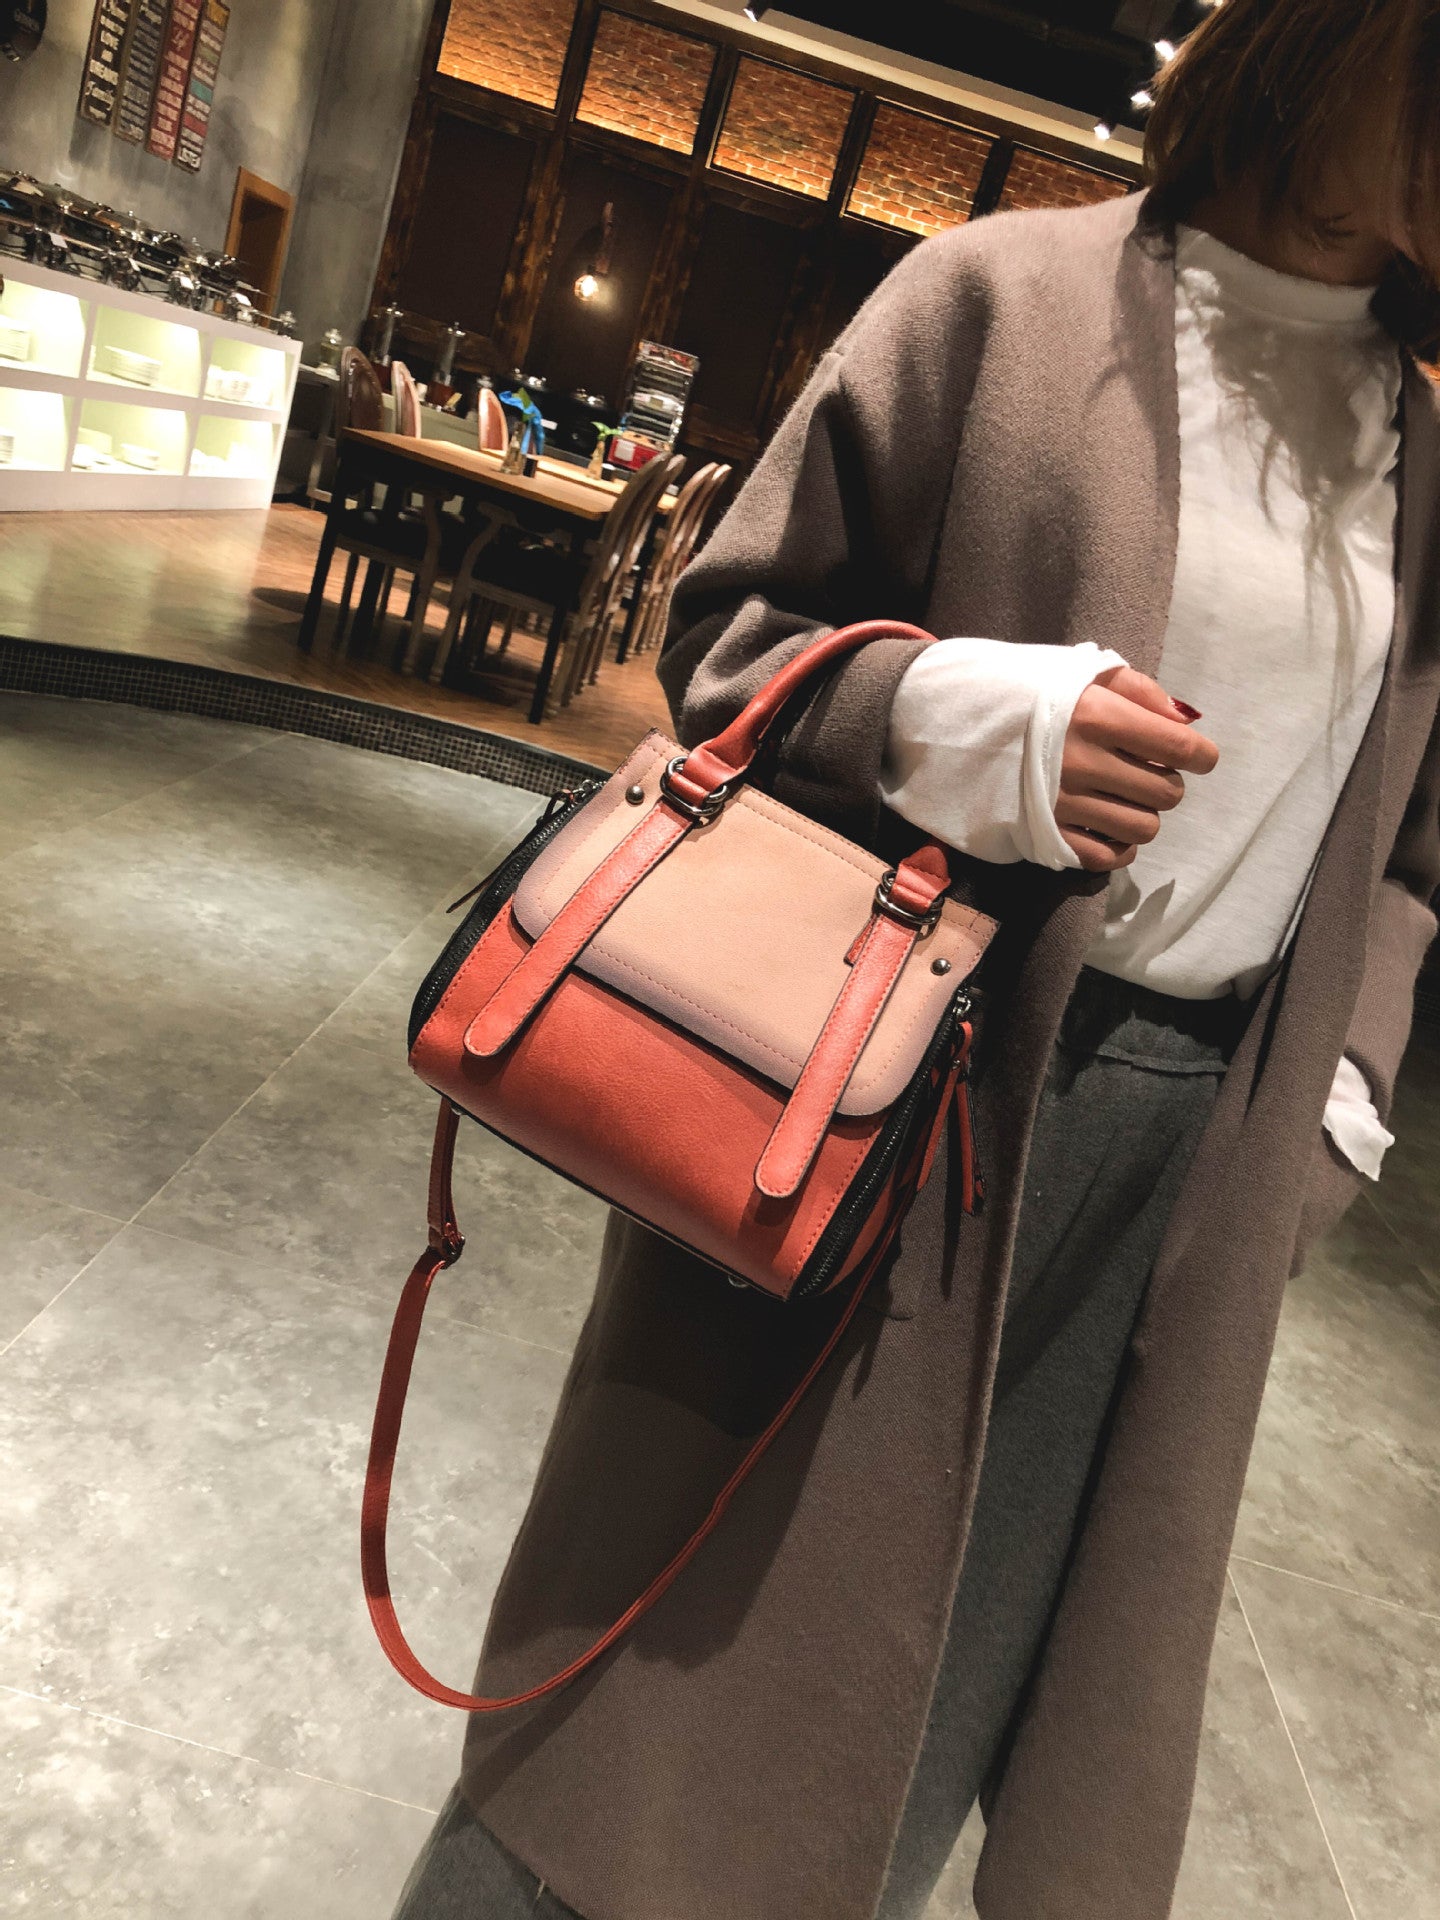 Touch Internal Soft Leather Handbags